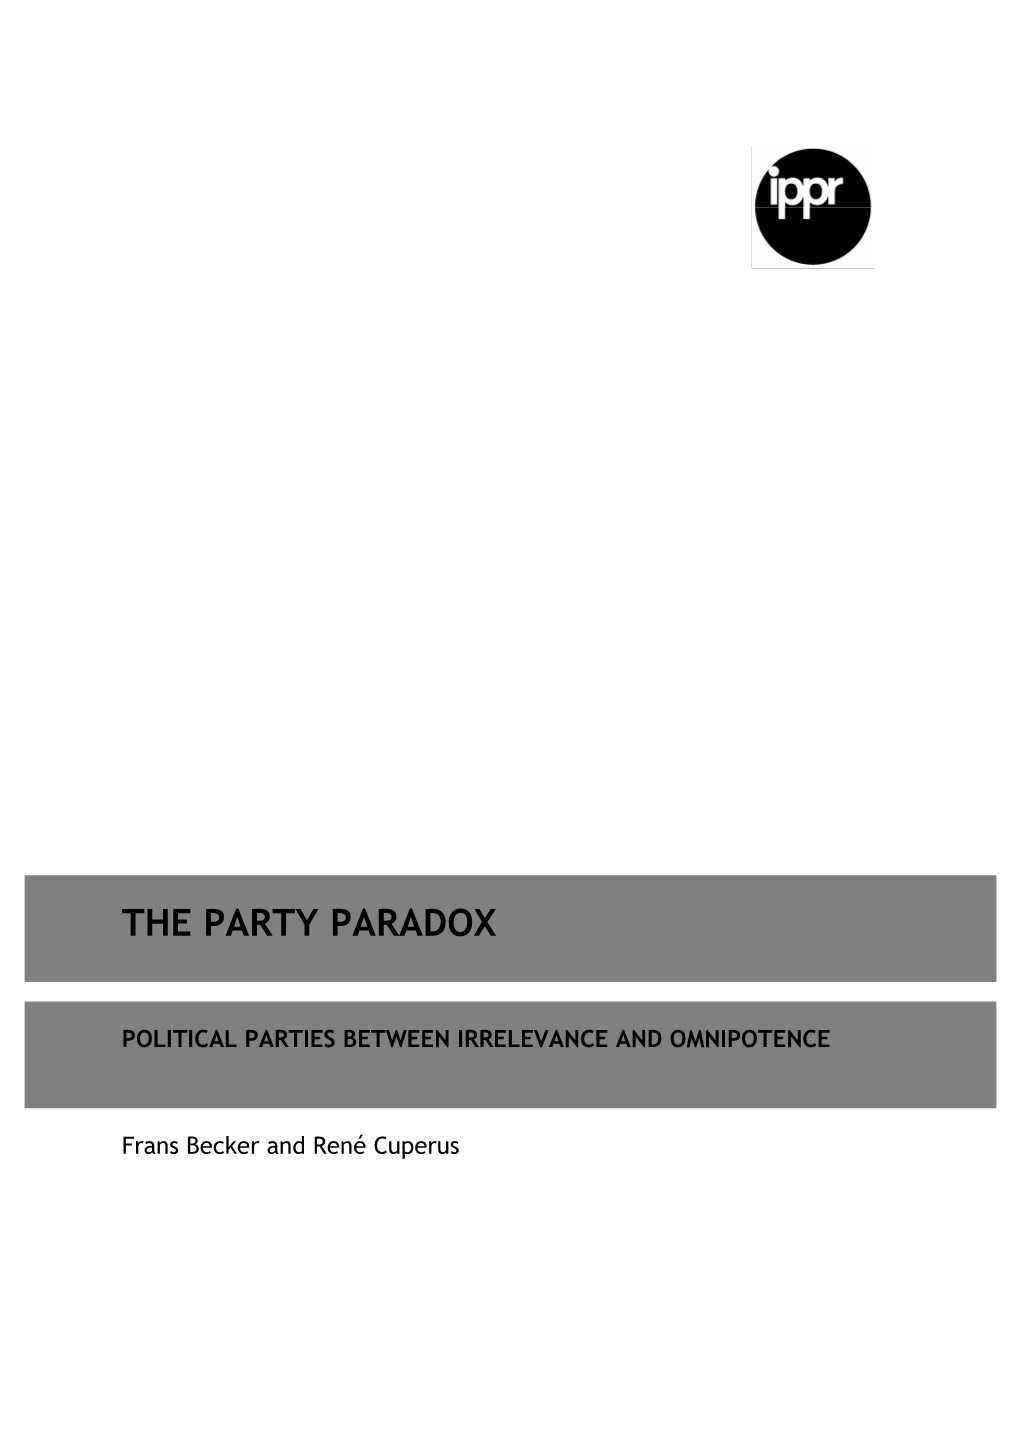 The Party Paradox